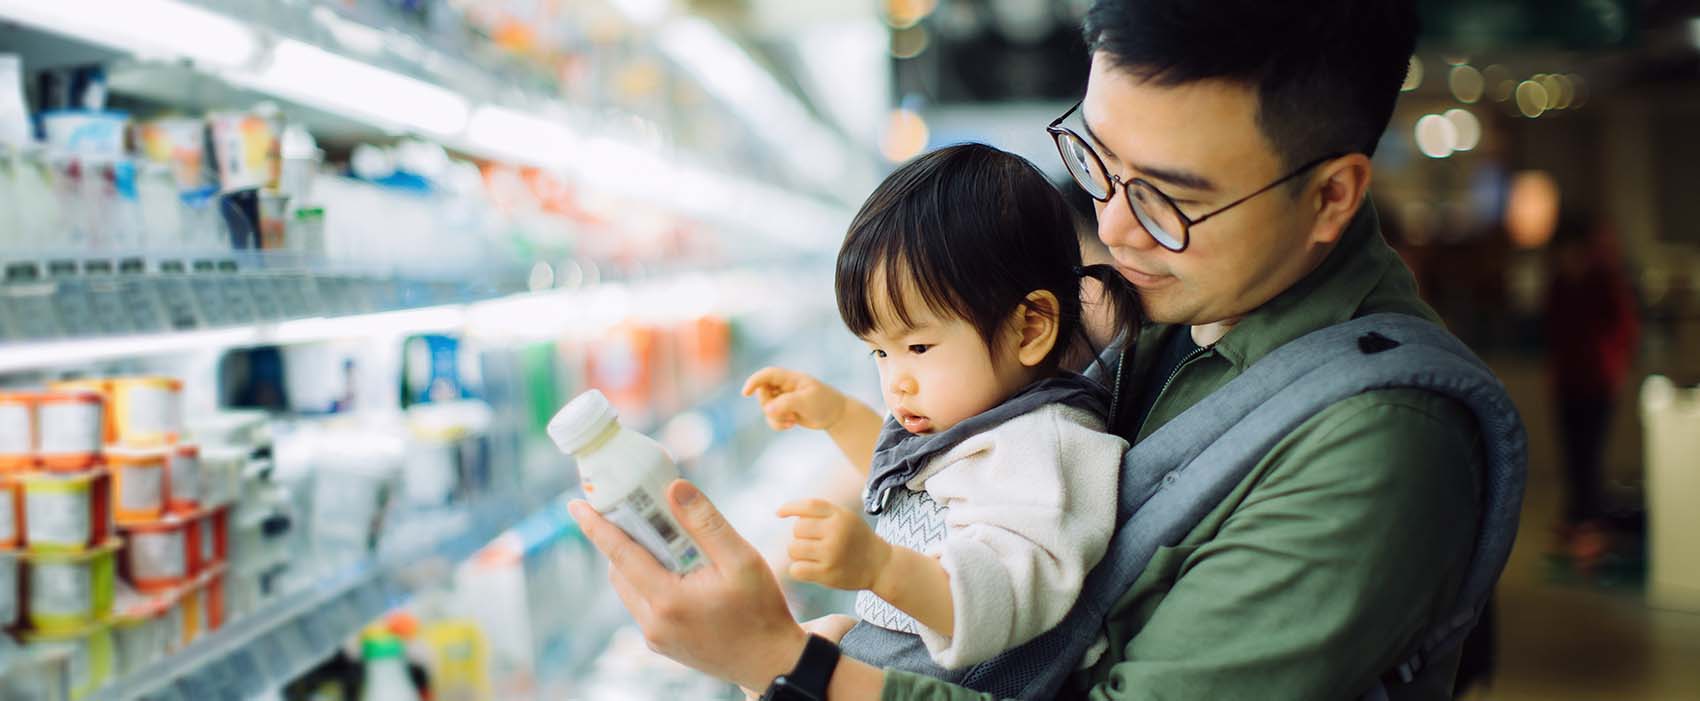 father with daughter grocery shopping for dairy products in supermarket